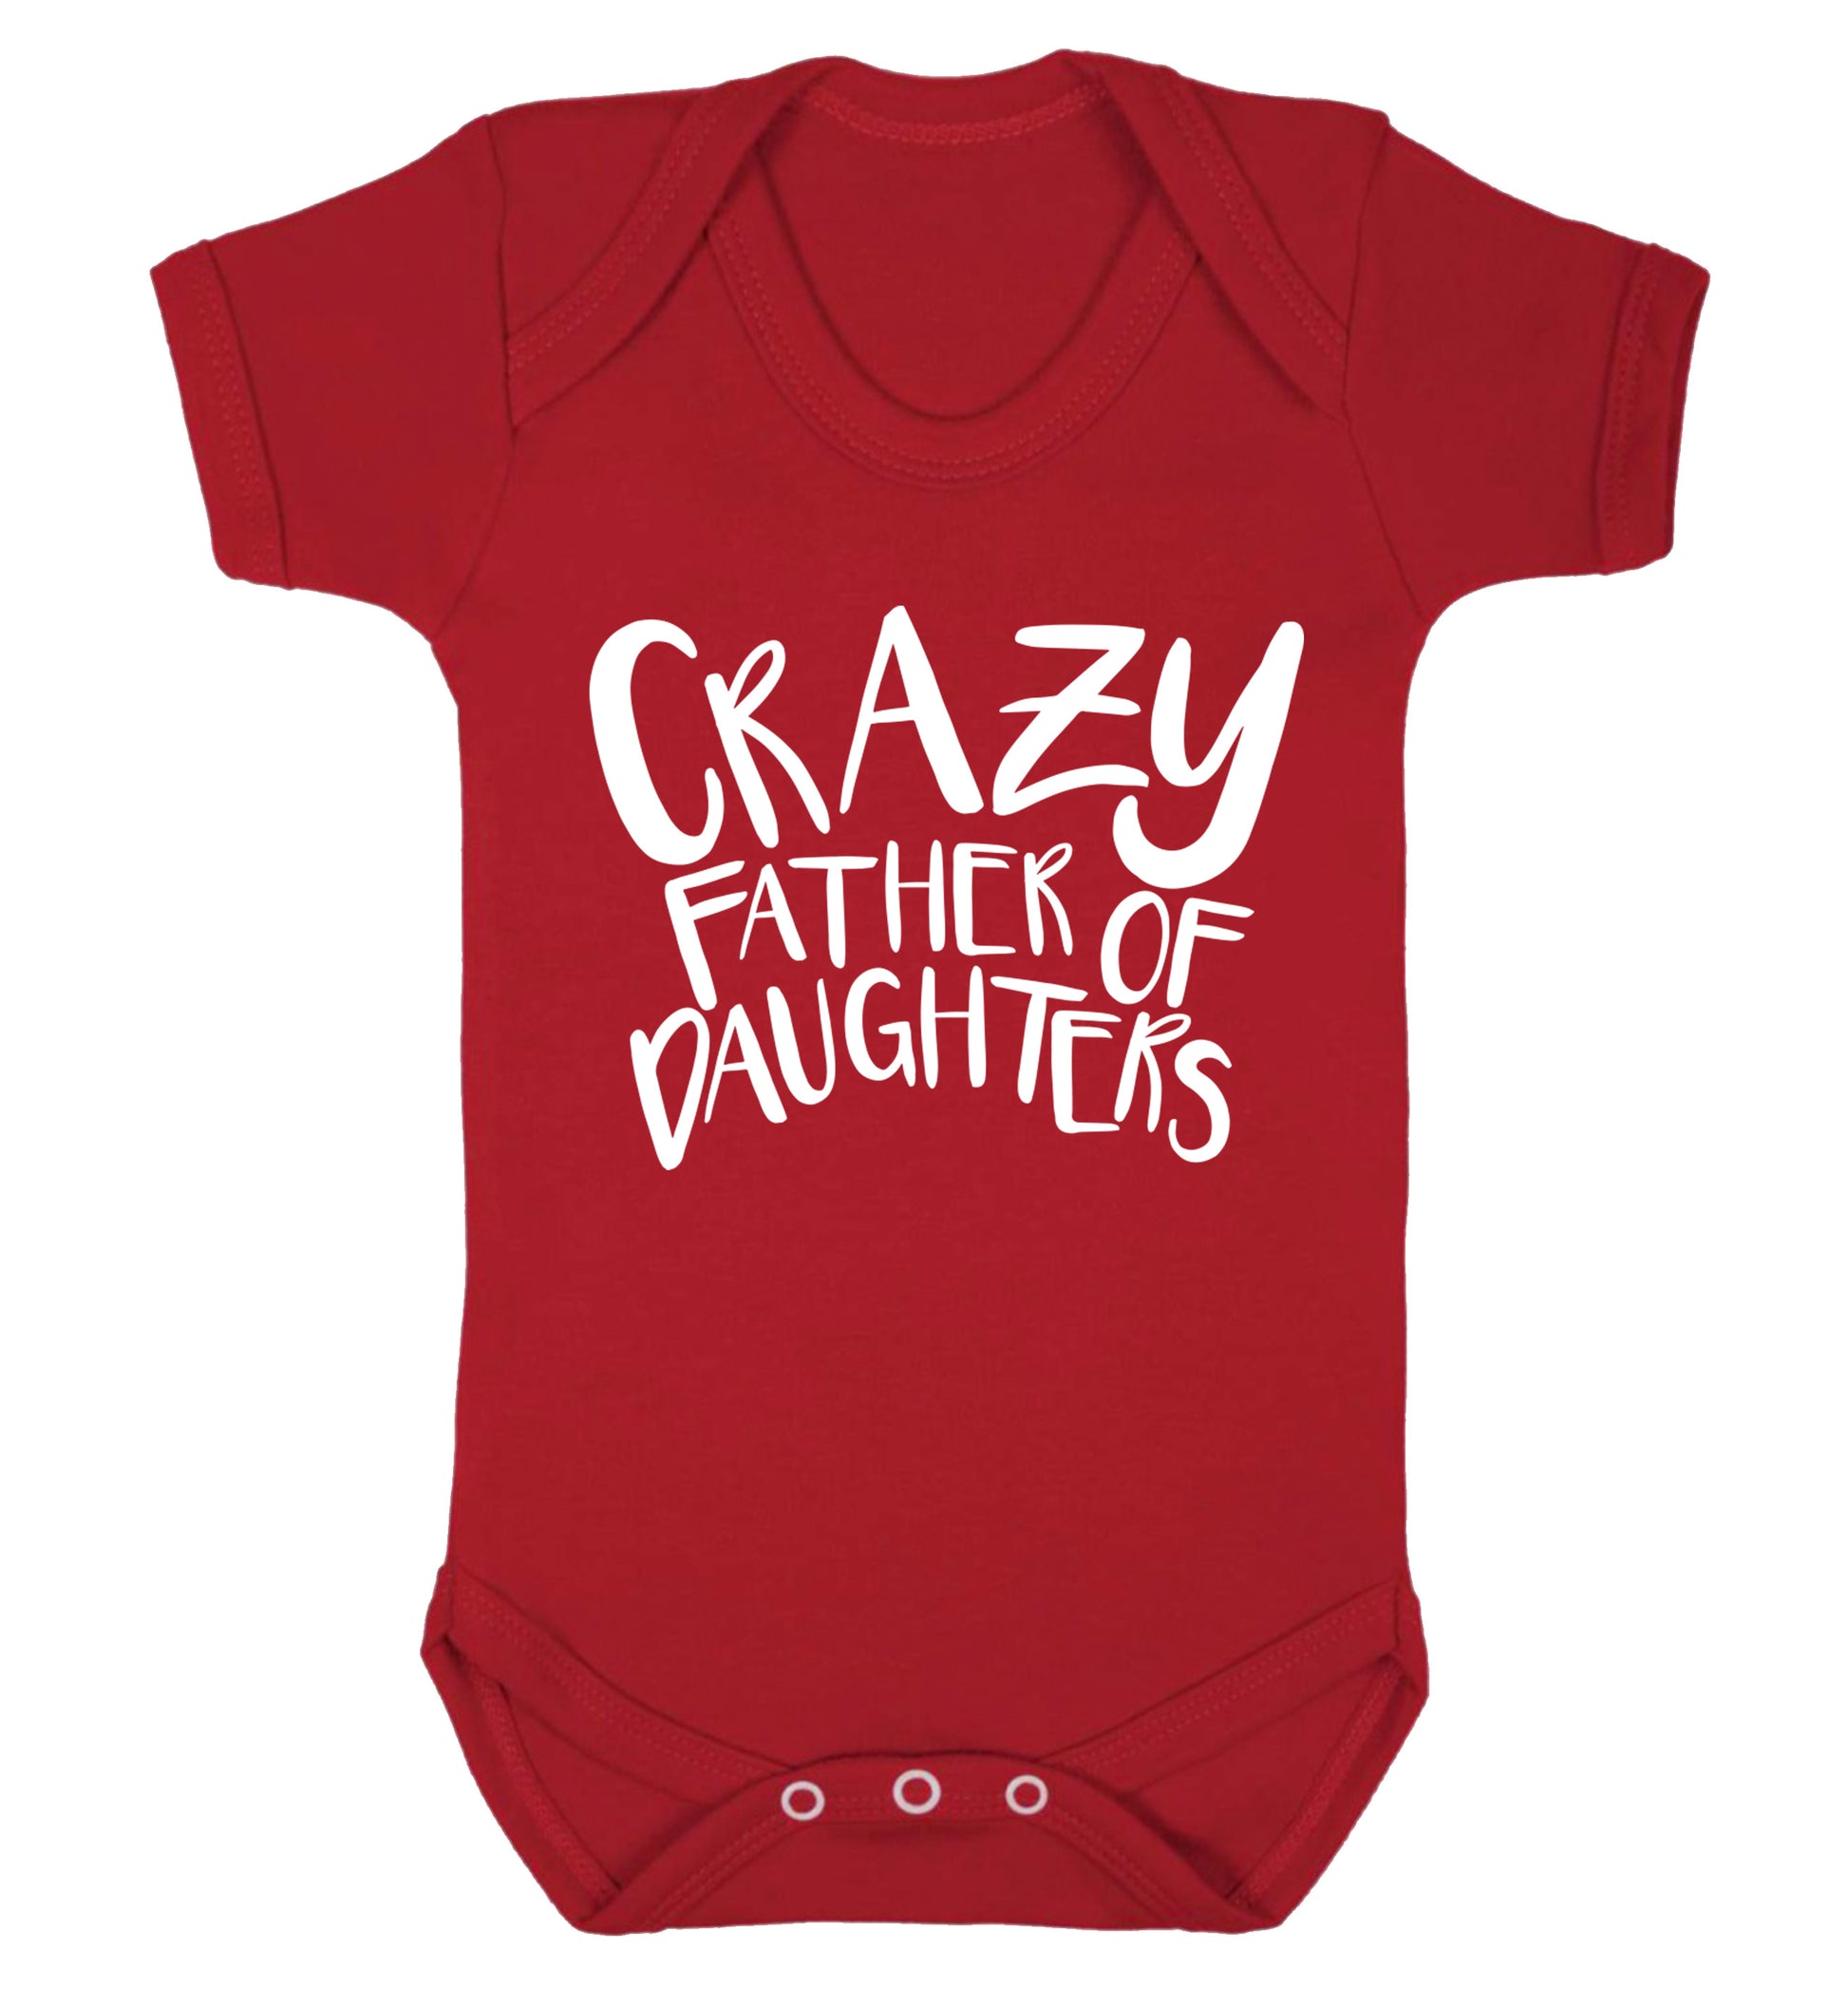 Crazy father of daughters Baby Vest red 18-24 months